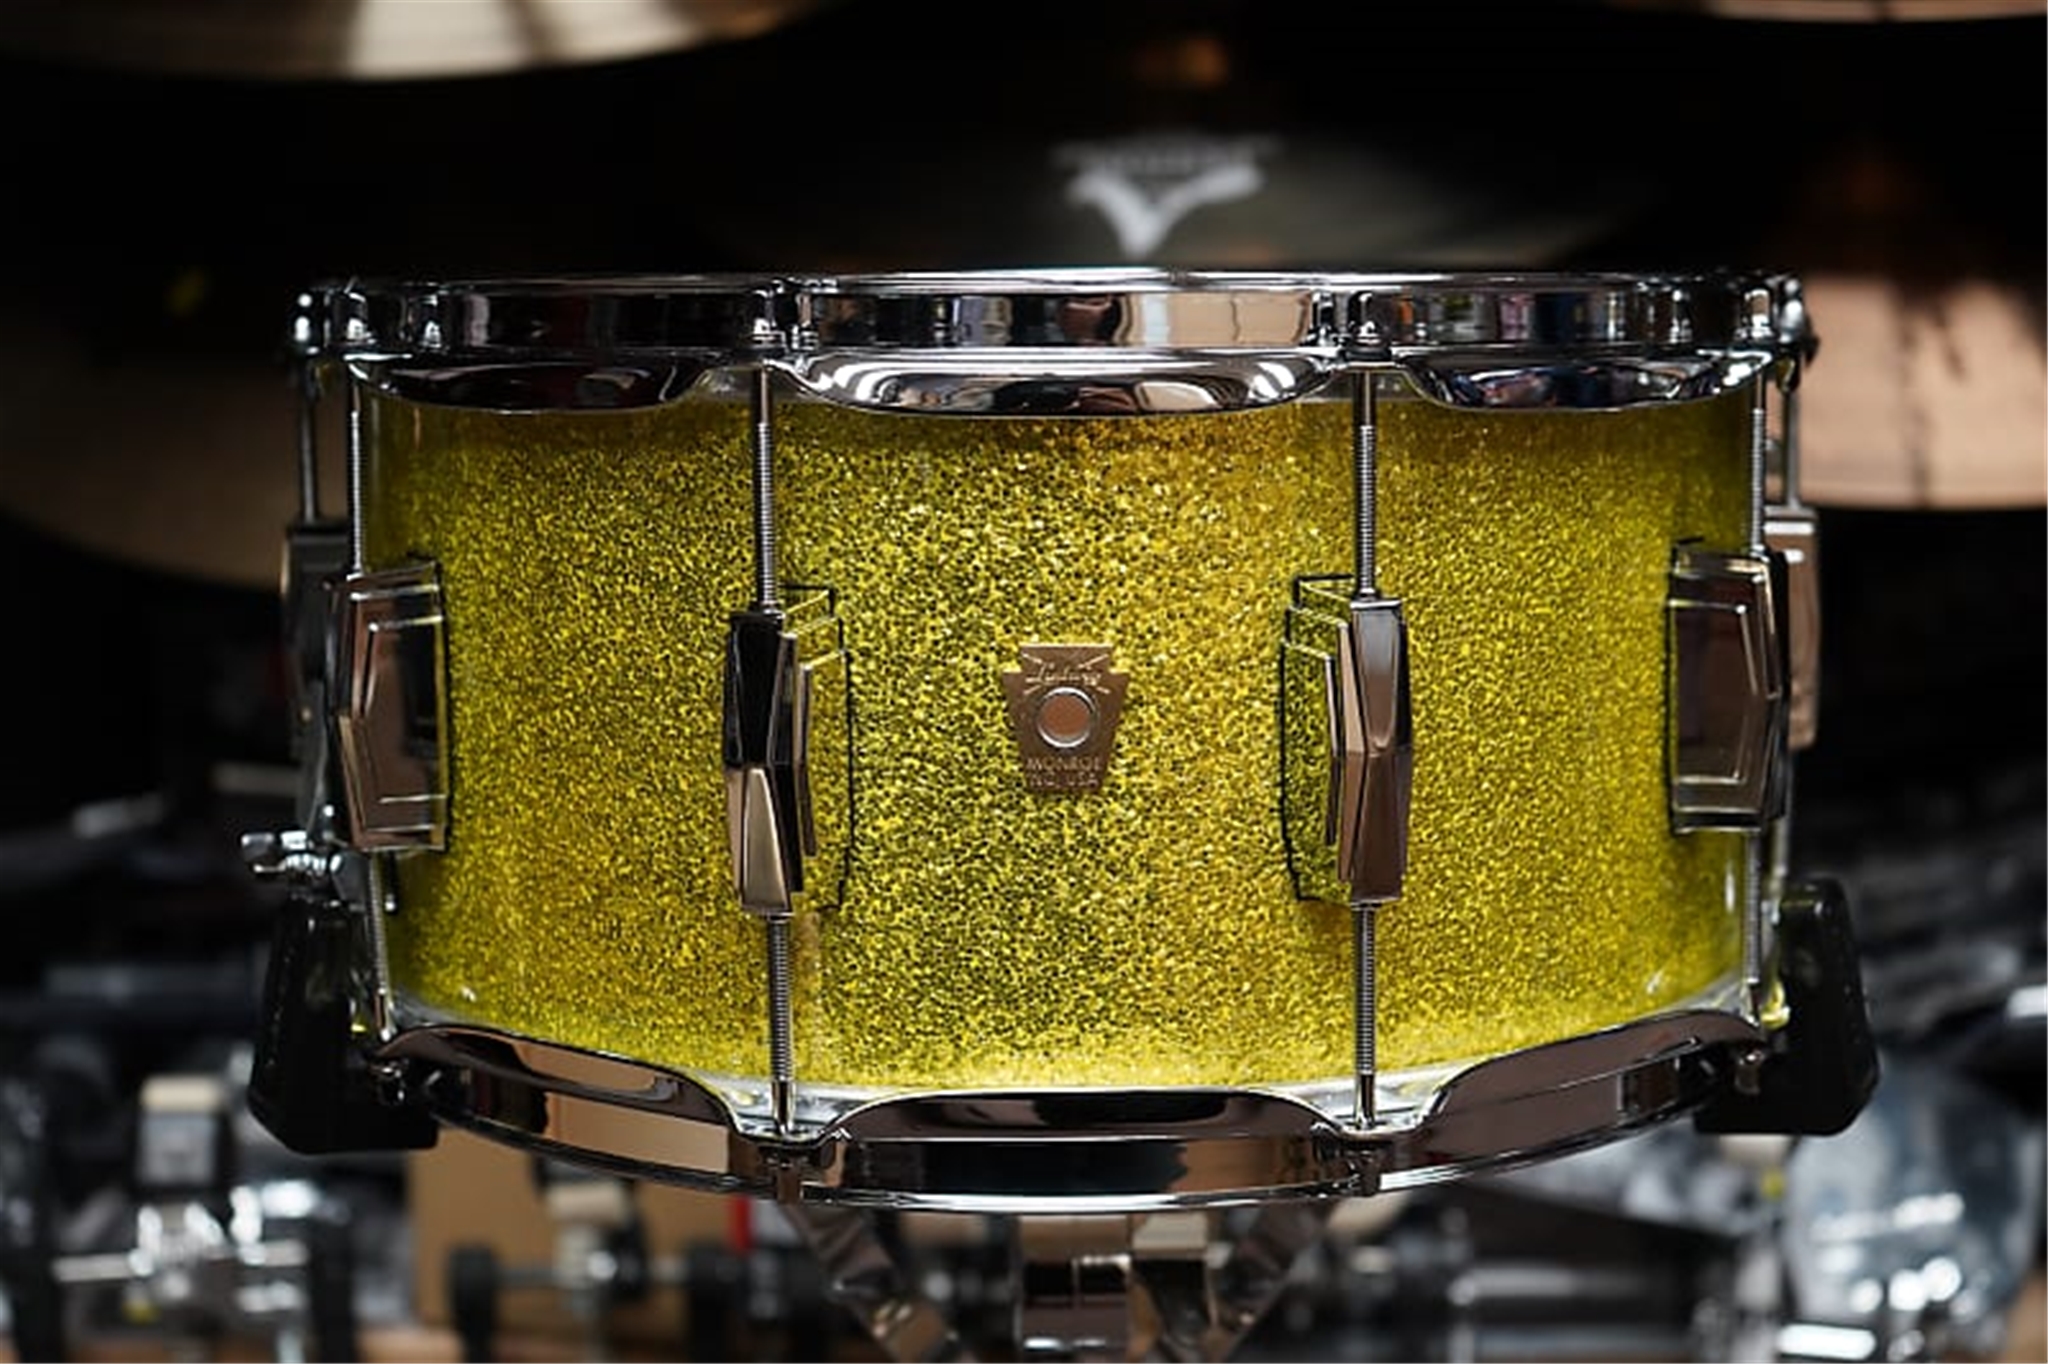 Ludwig USA Maple Classic Series Yellow Glitter Sparkle Maple Snare Drum w/Imperial Lugs | 6.5" x 14"